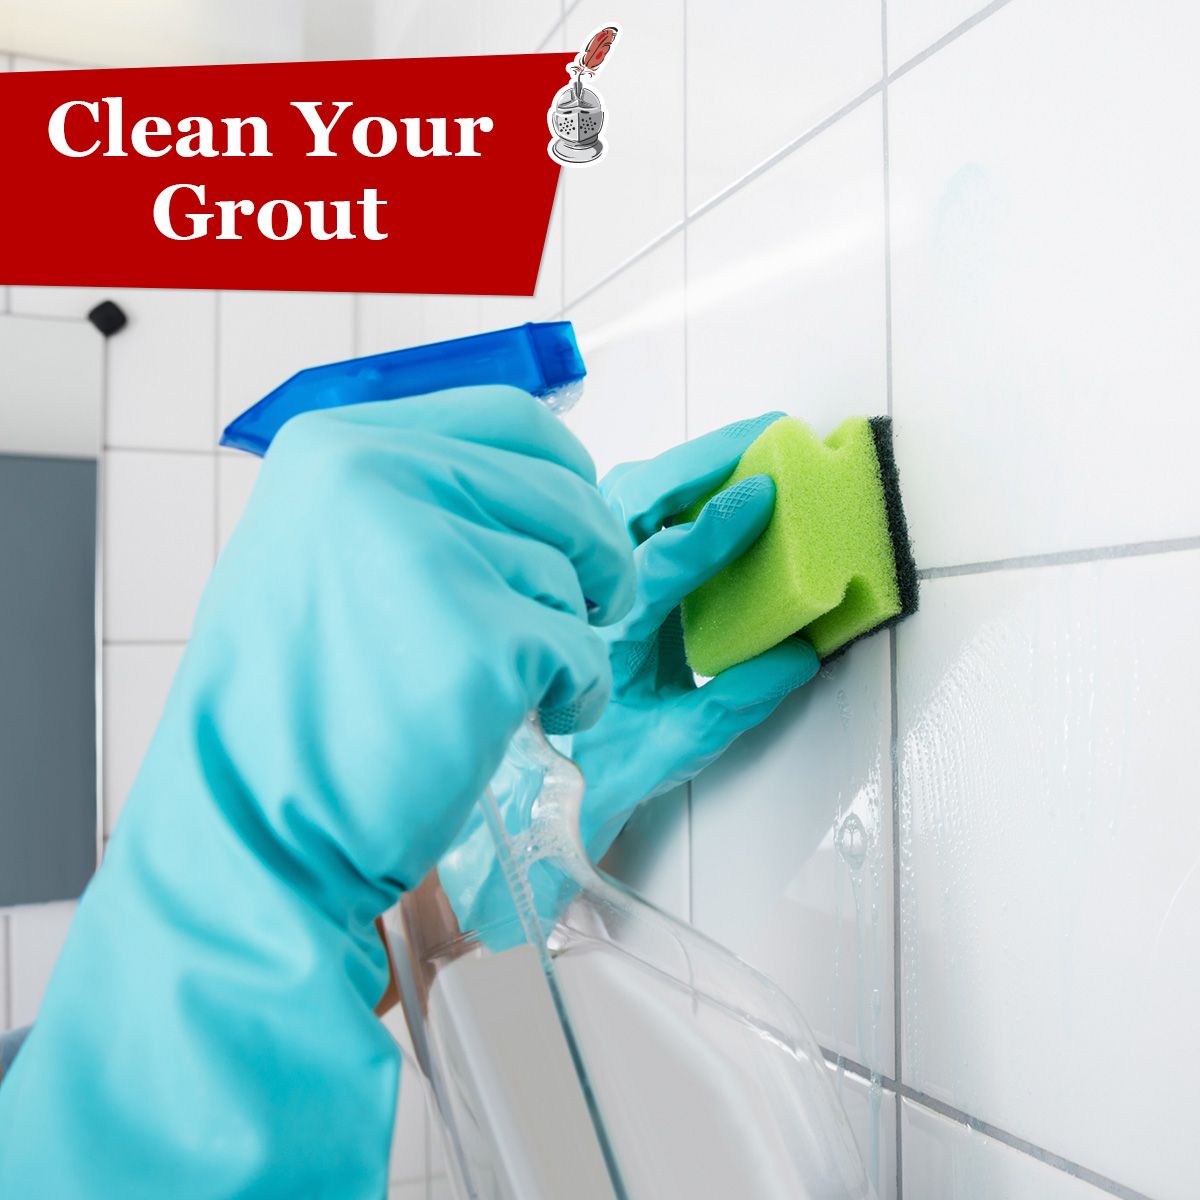 Clean Your Grout